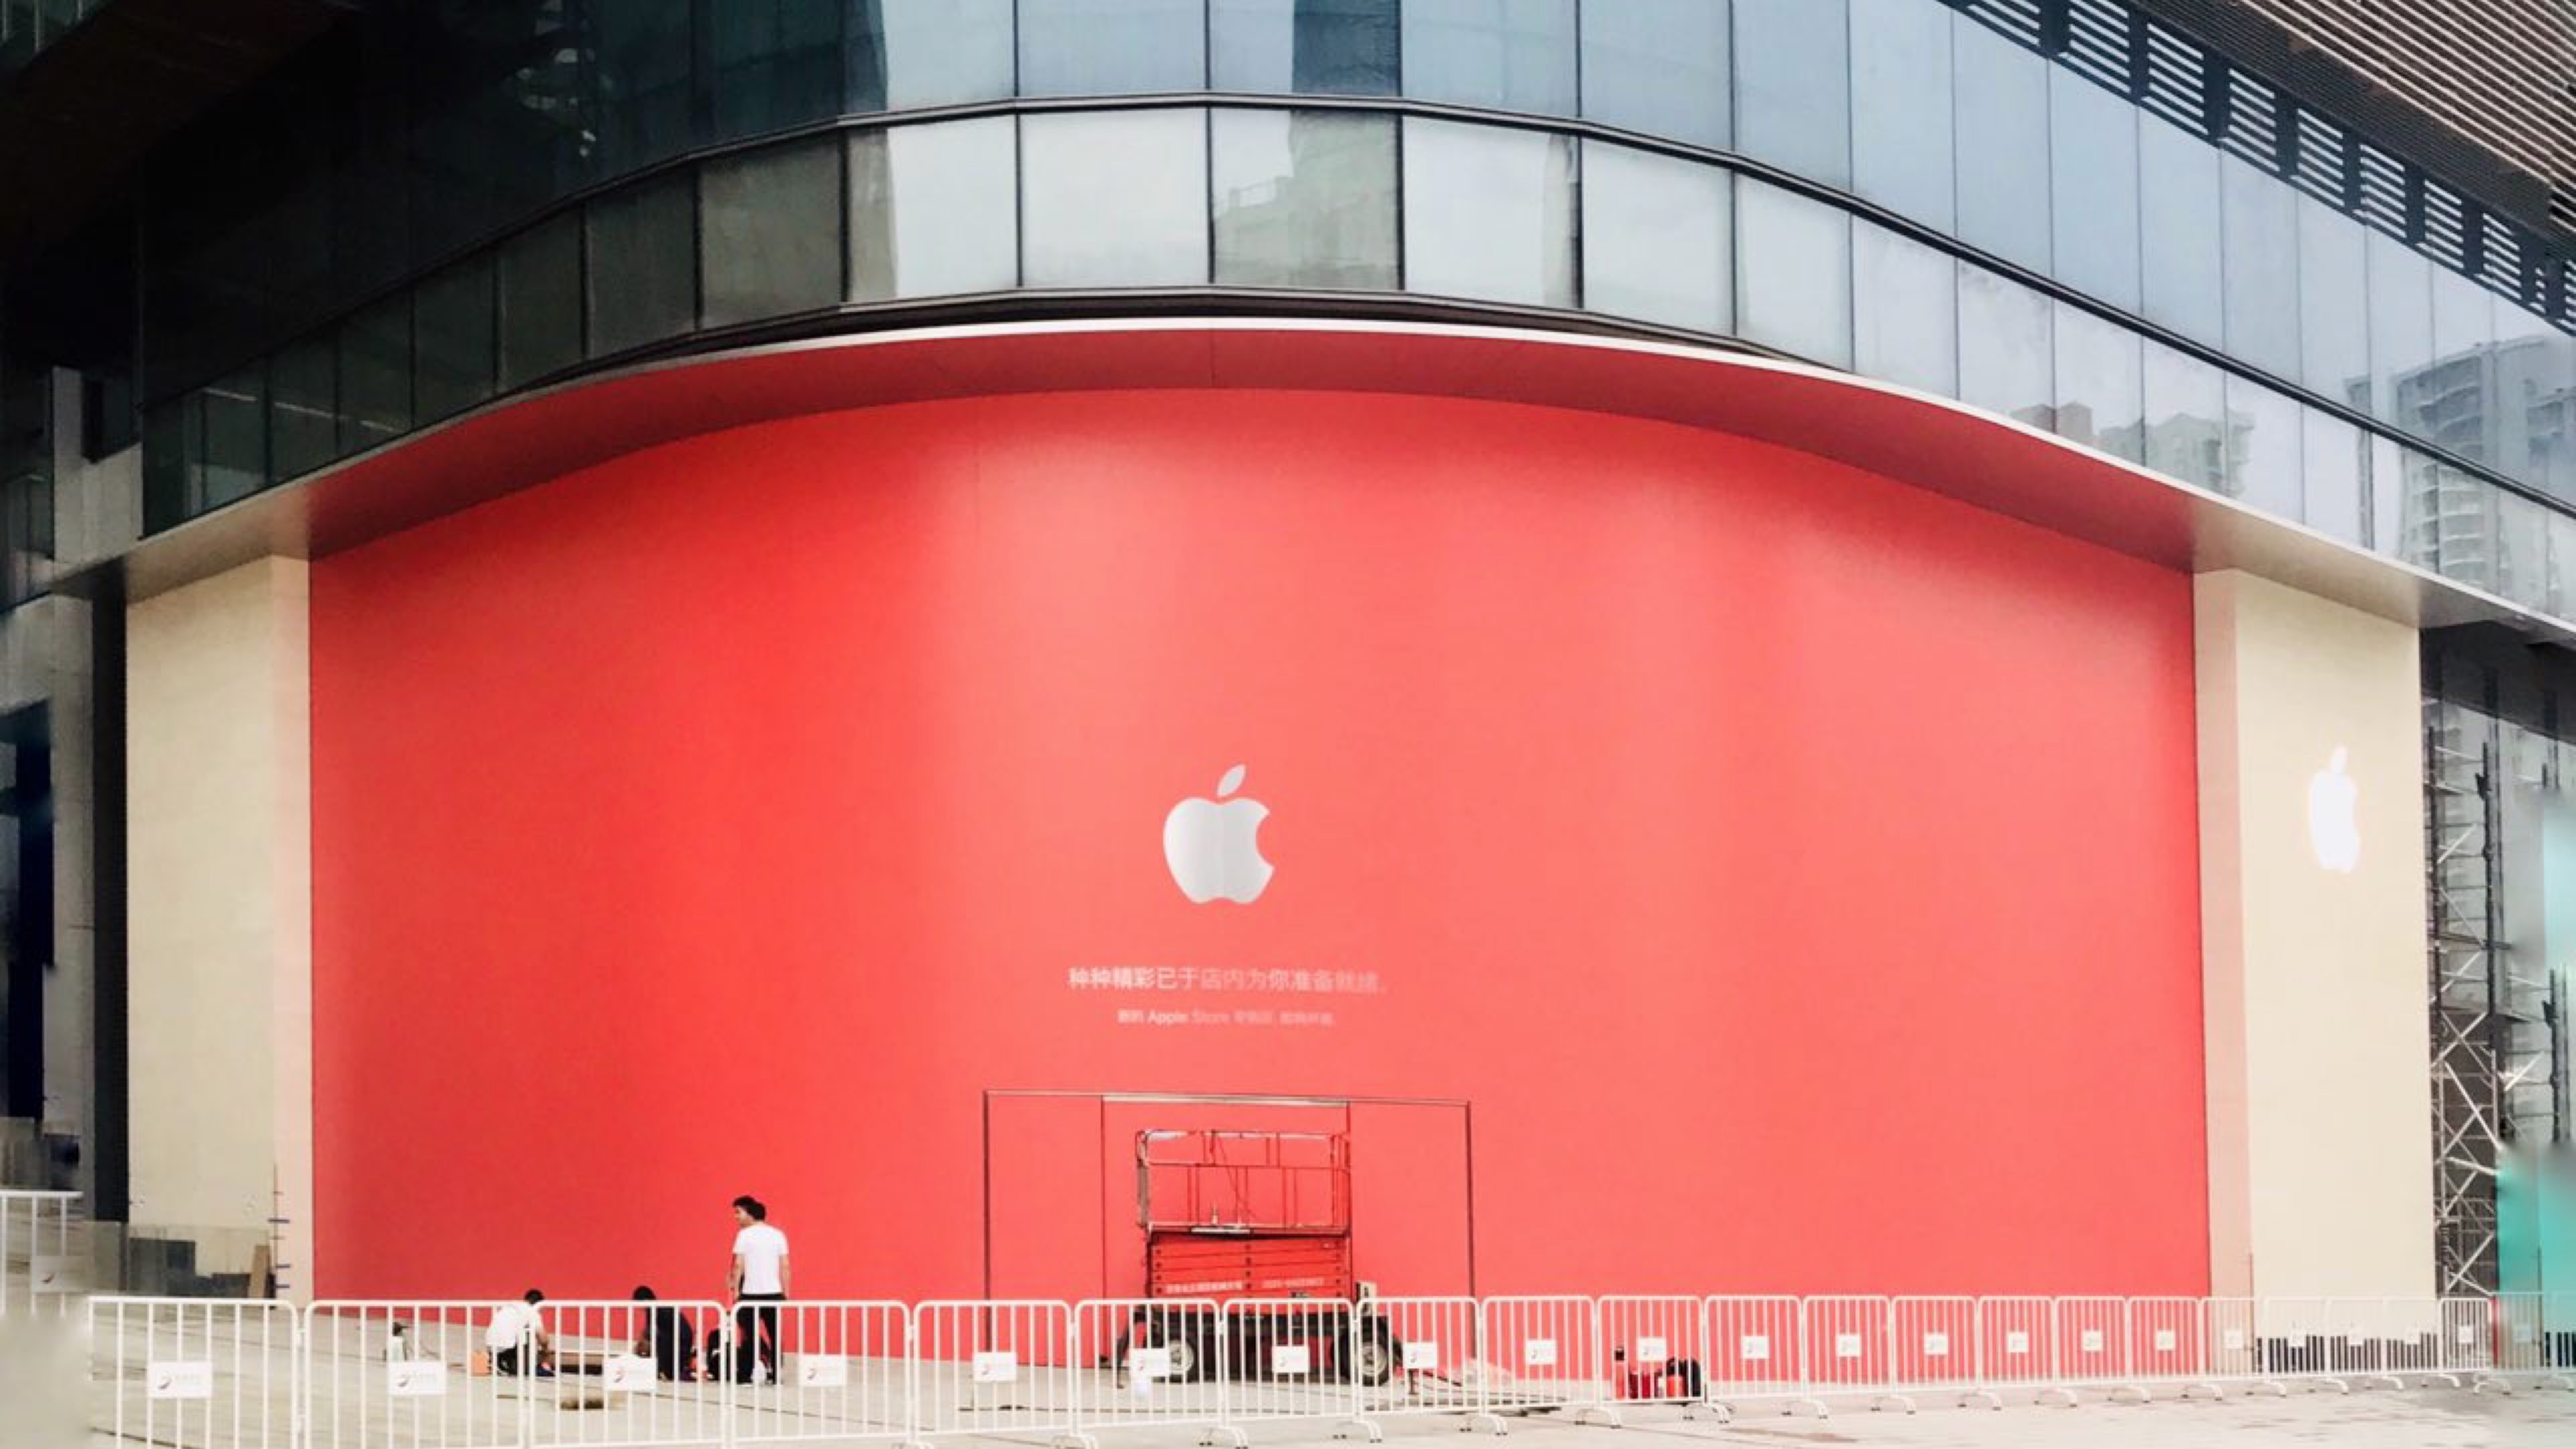 Architecture, creativity, community: A field guide to Apple retail in 2018  - 9to5Mac